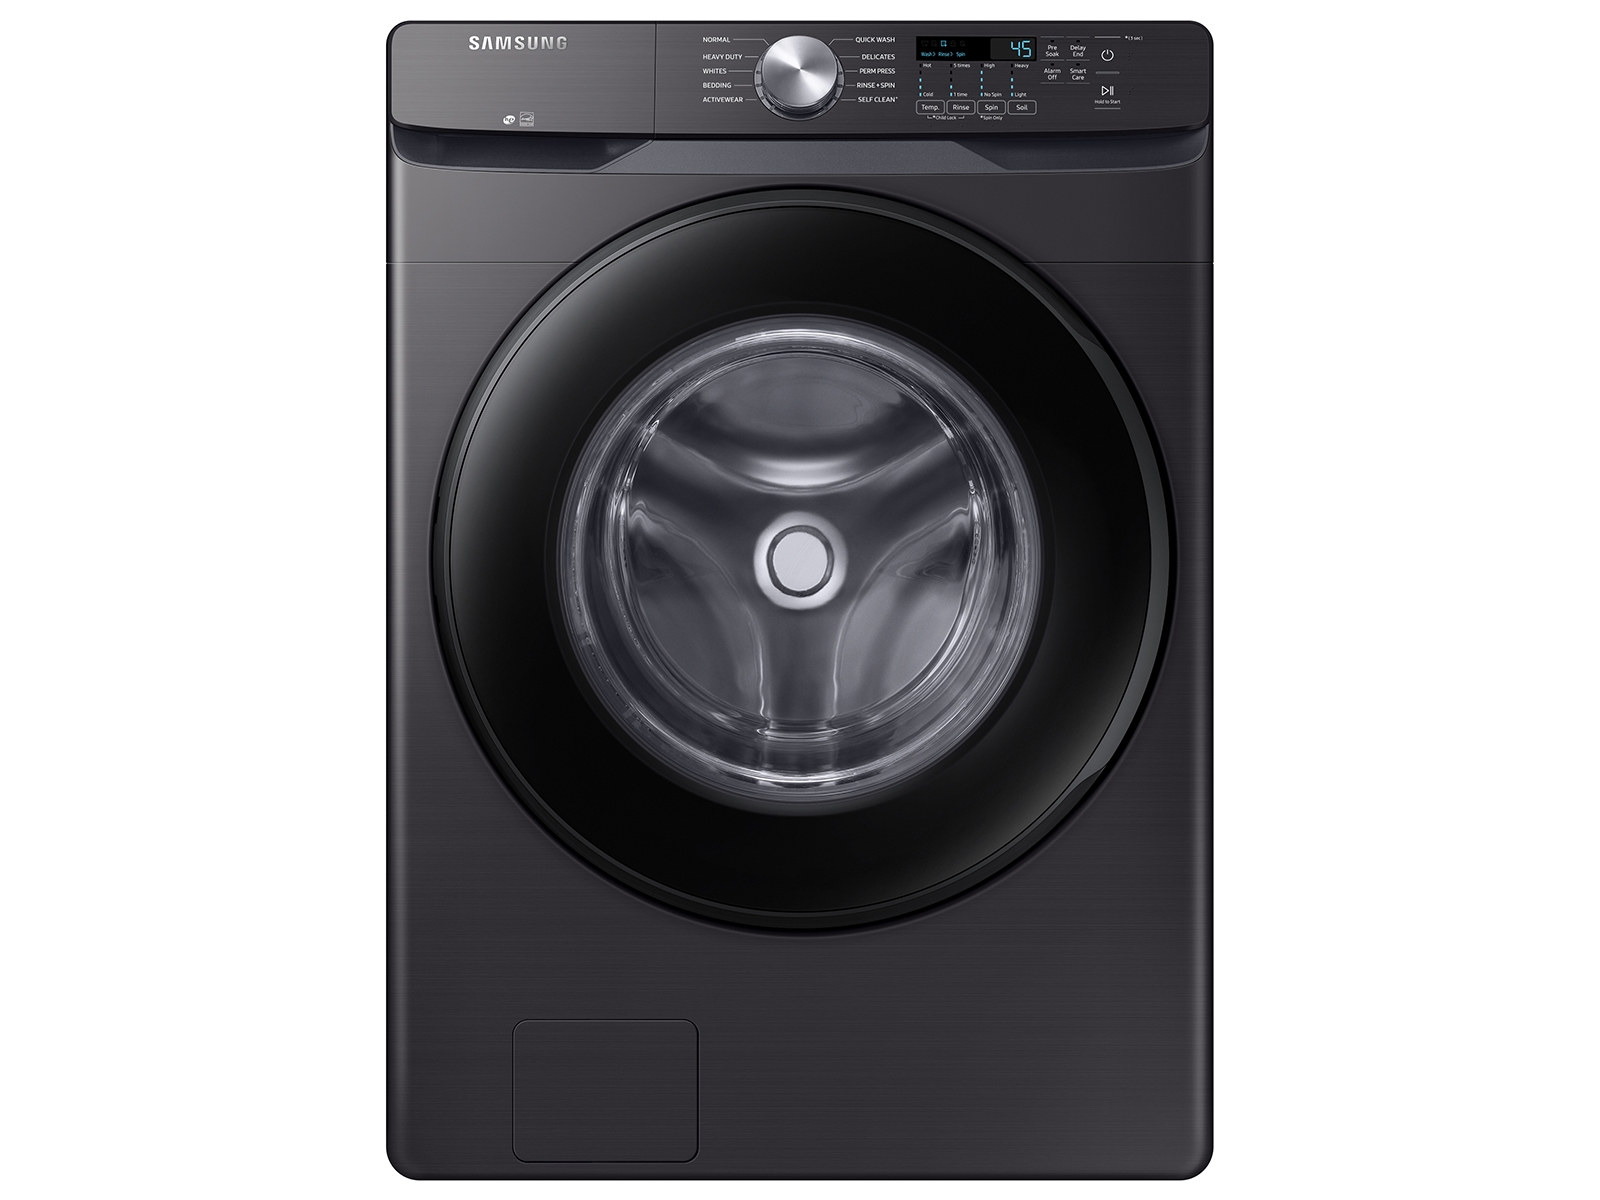 Photos - Washing Machine Samsung 4.5 cu. ft. Front Load Washer with Vibration Reduction Technology+ 